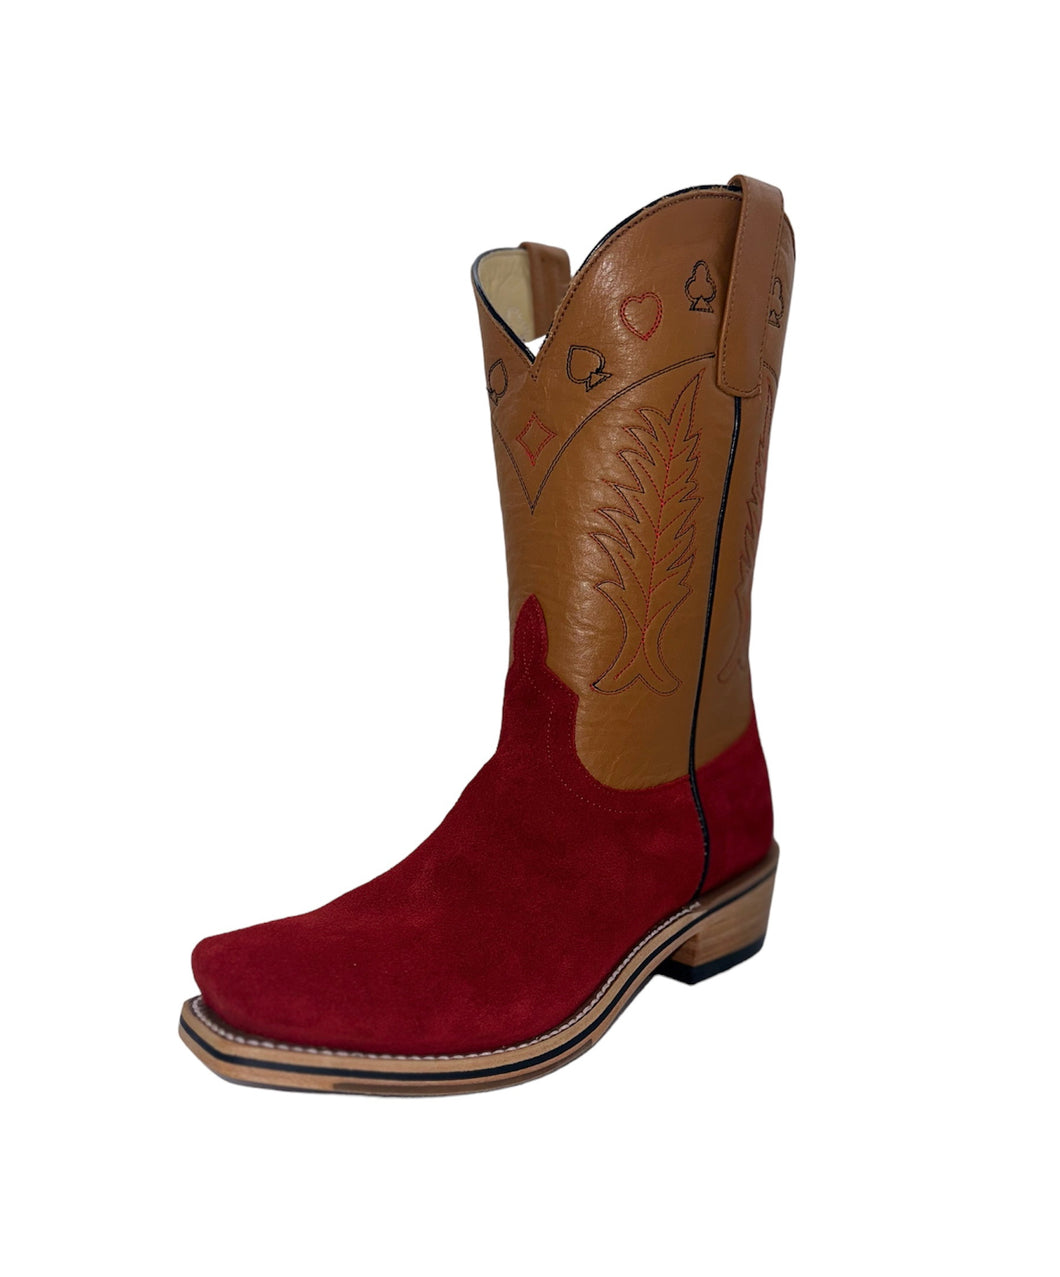 Horsepower Men's High Noon Red Sueded Boot